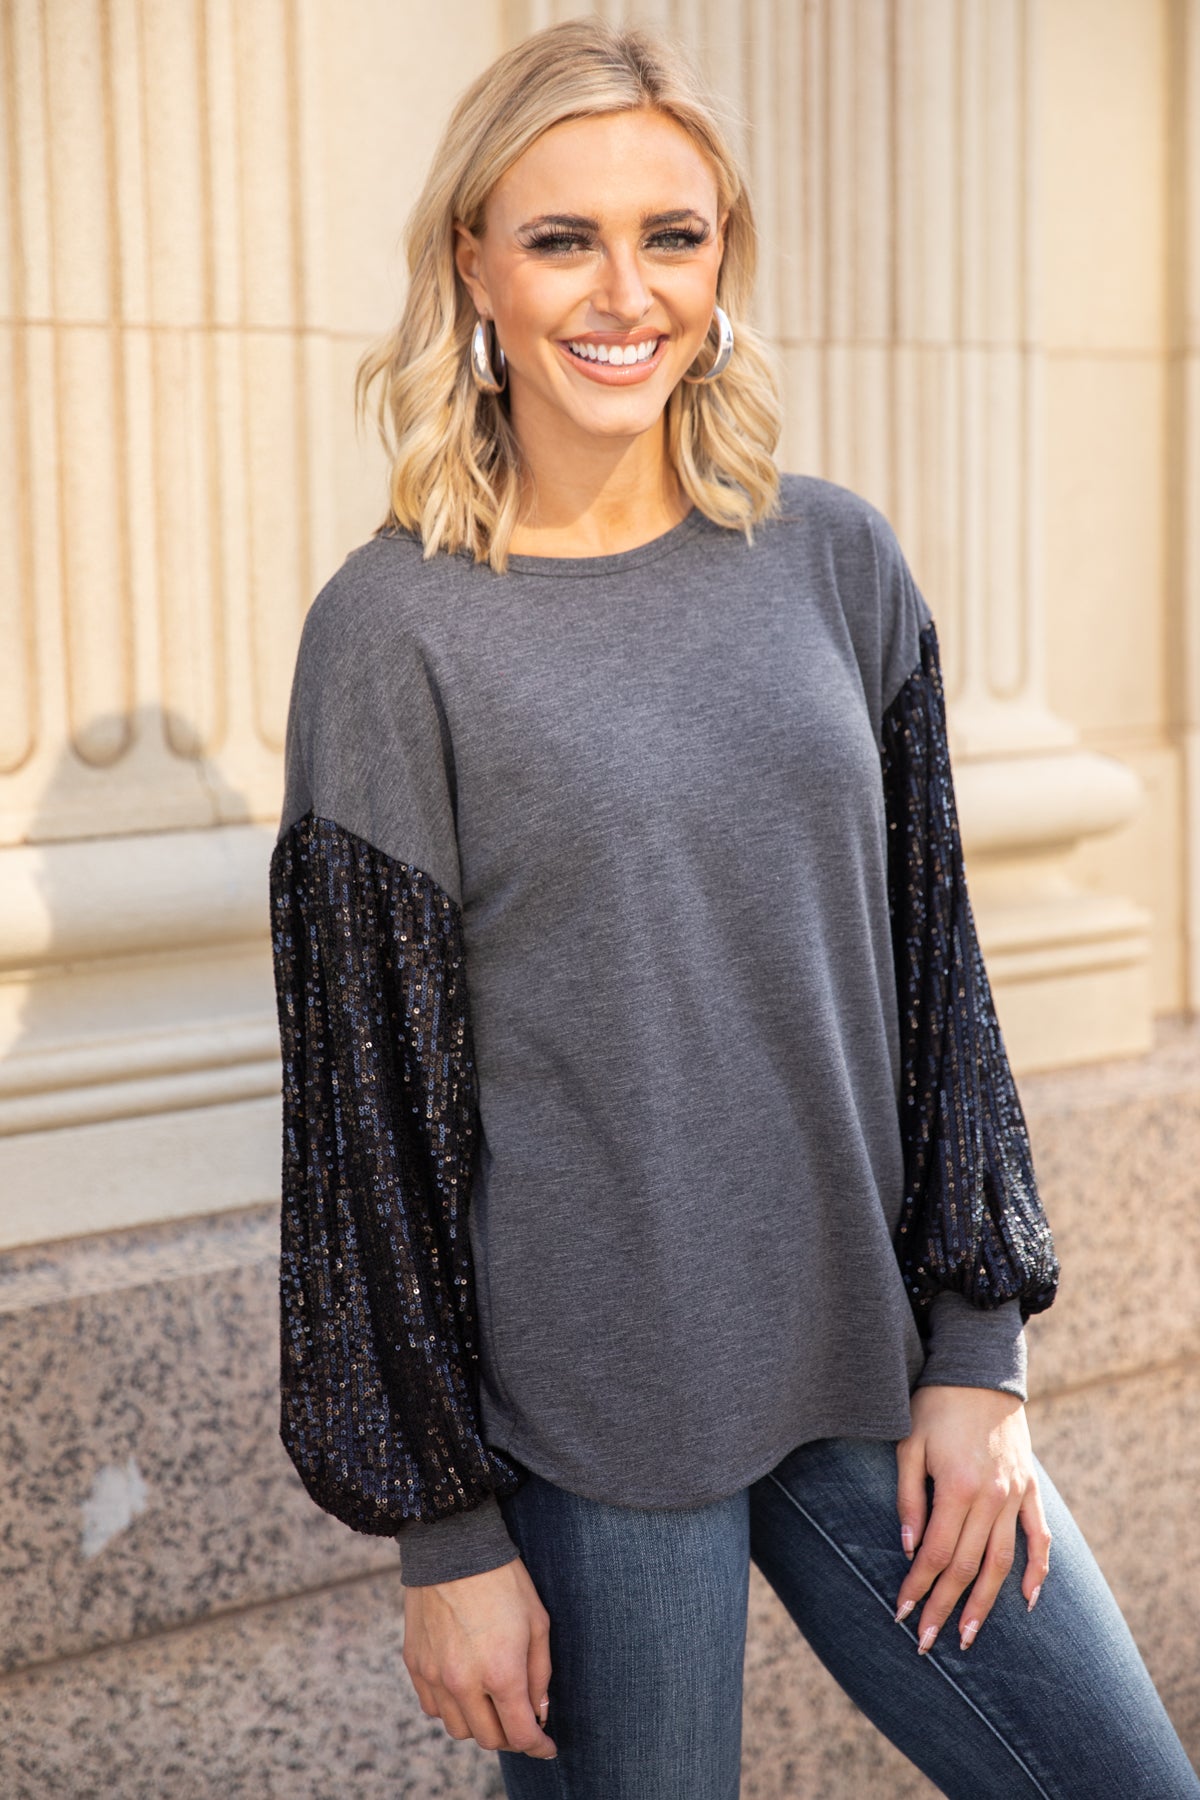 Charcoal and Black Sequin Sleeve Top - Filly Flair